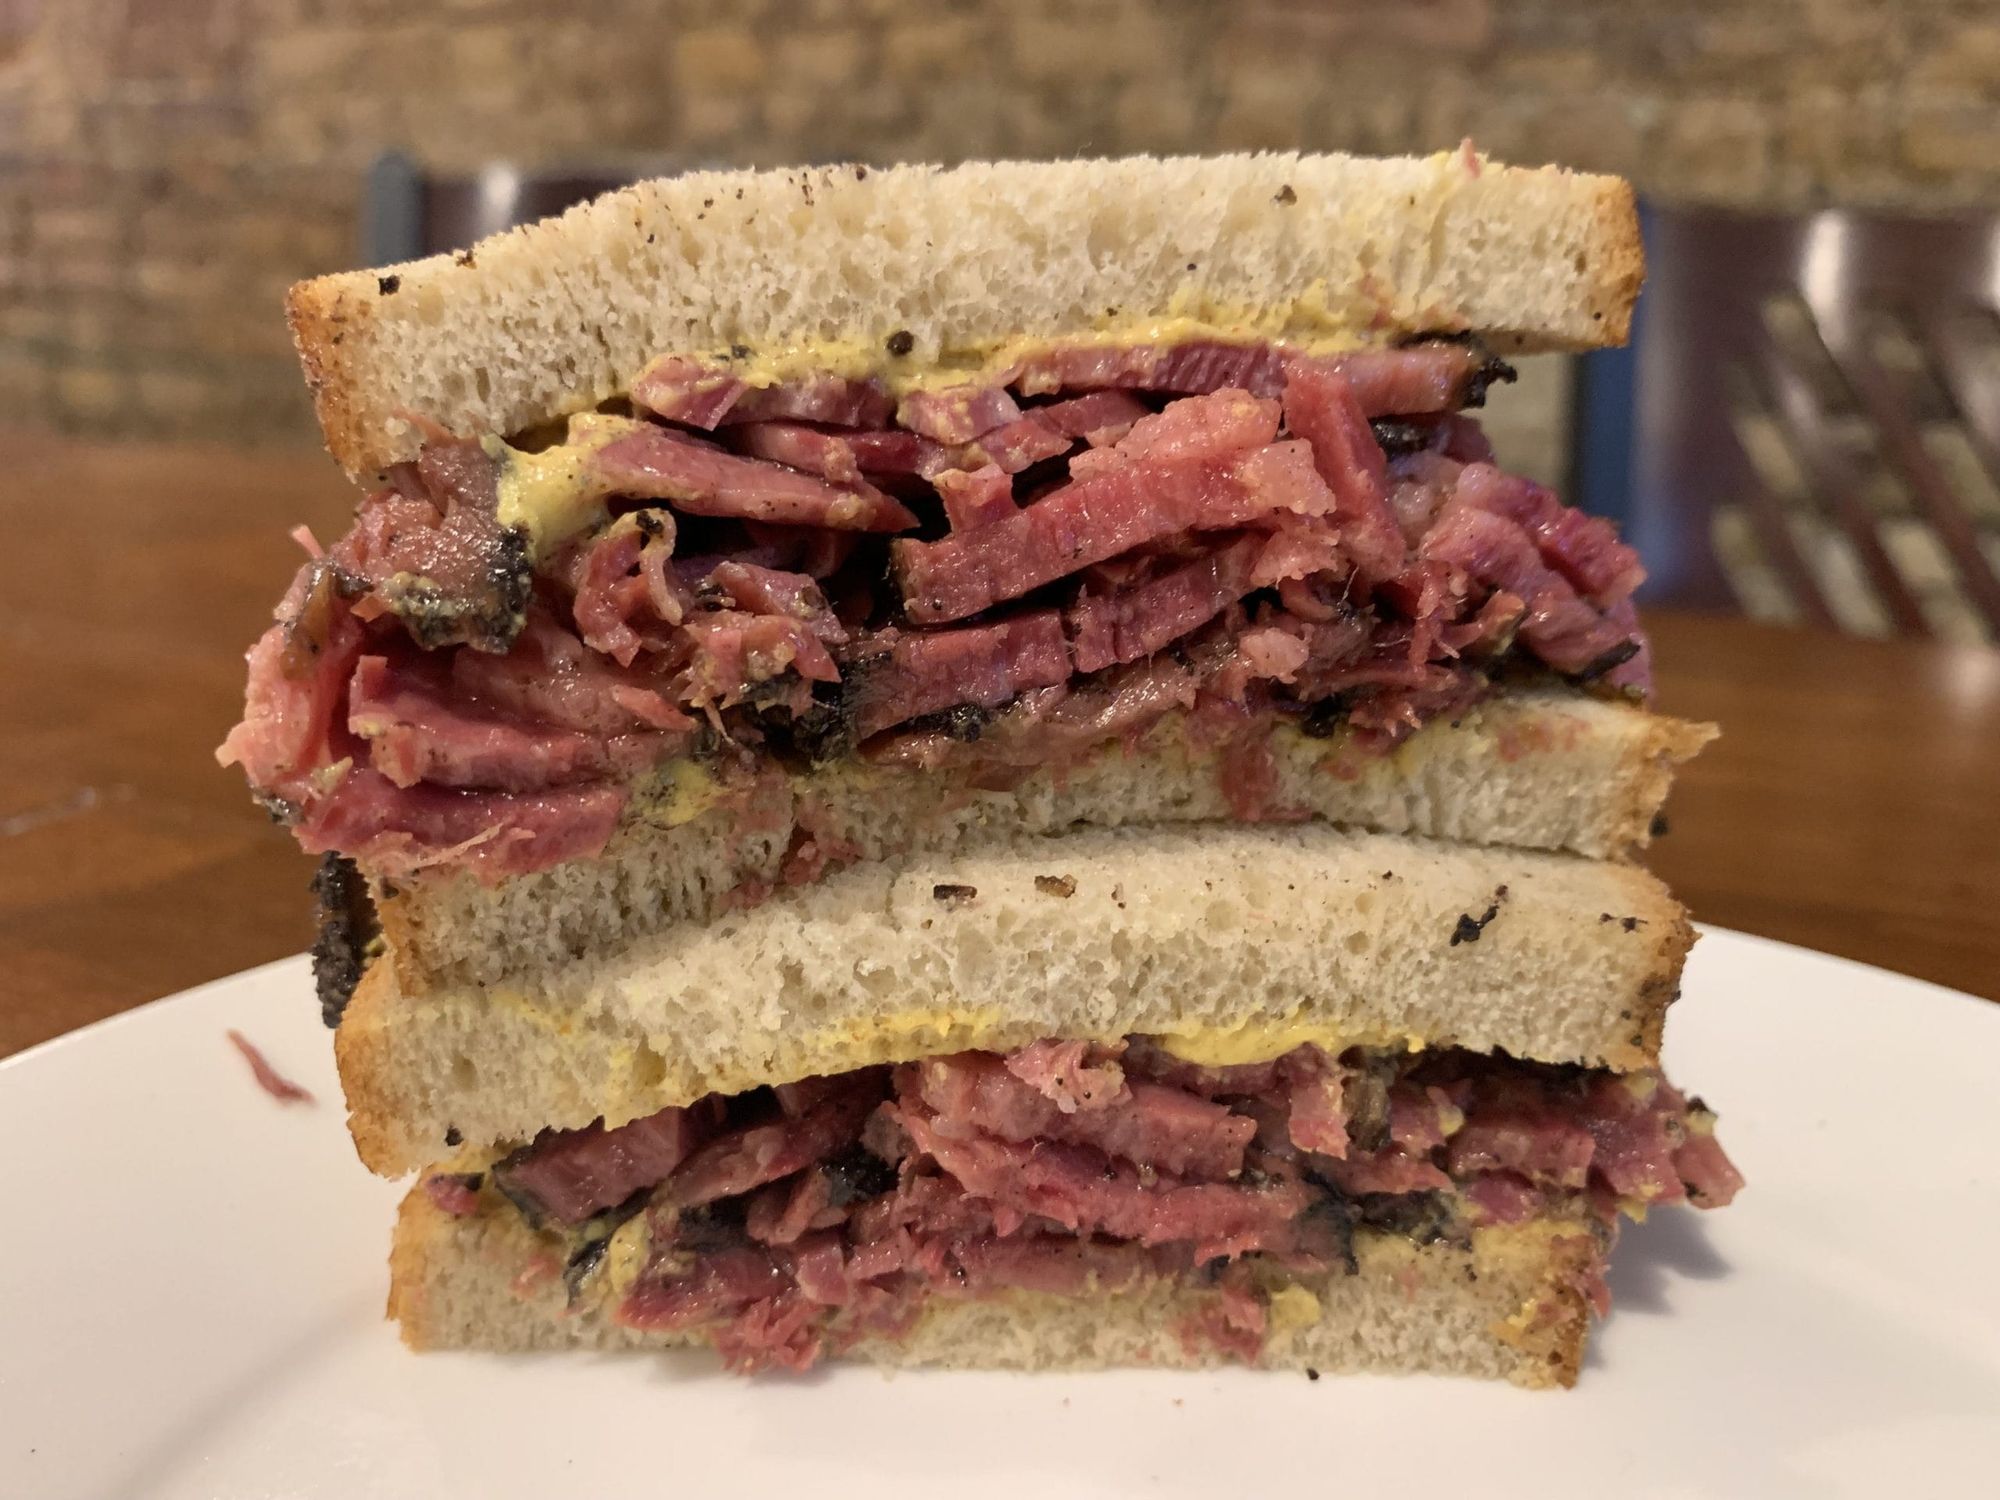 A Pastrami Better Than Katz’s? David’s Brisket House Owner Opens Pastrami Masters